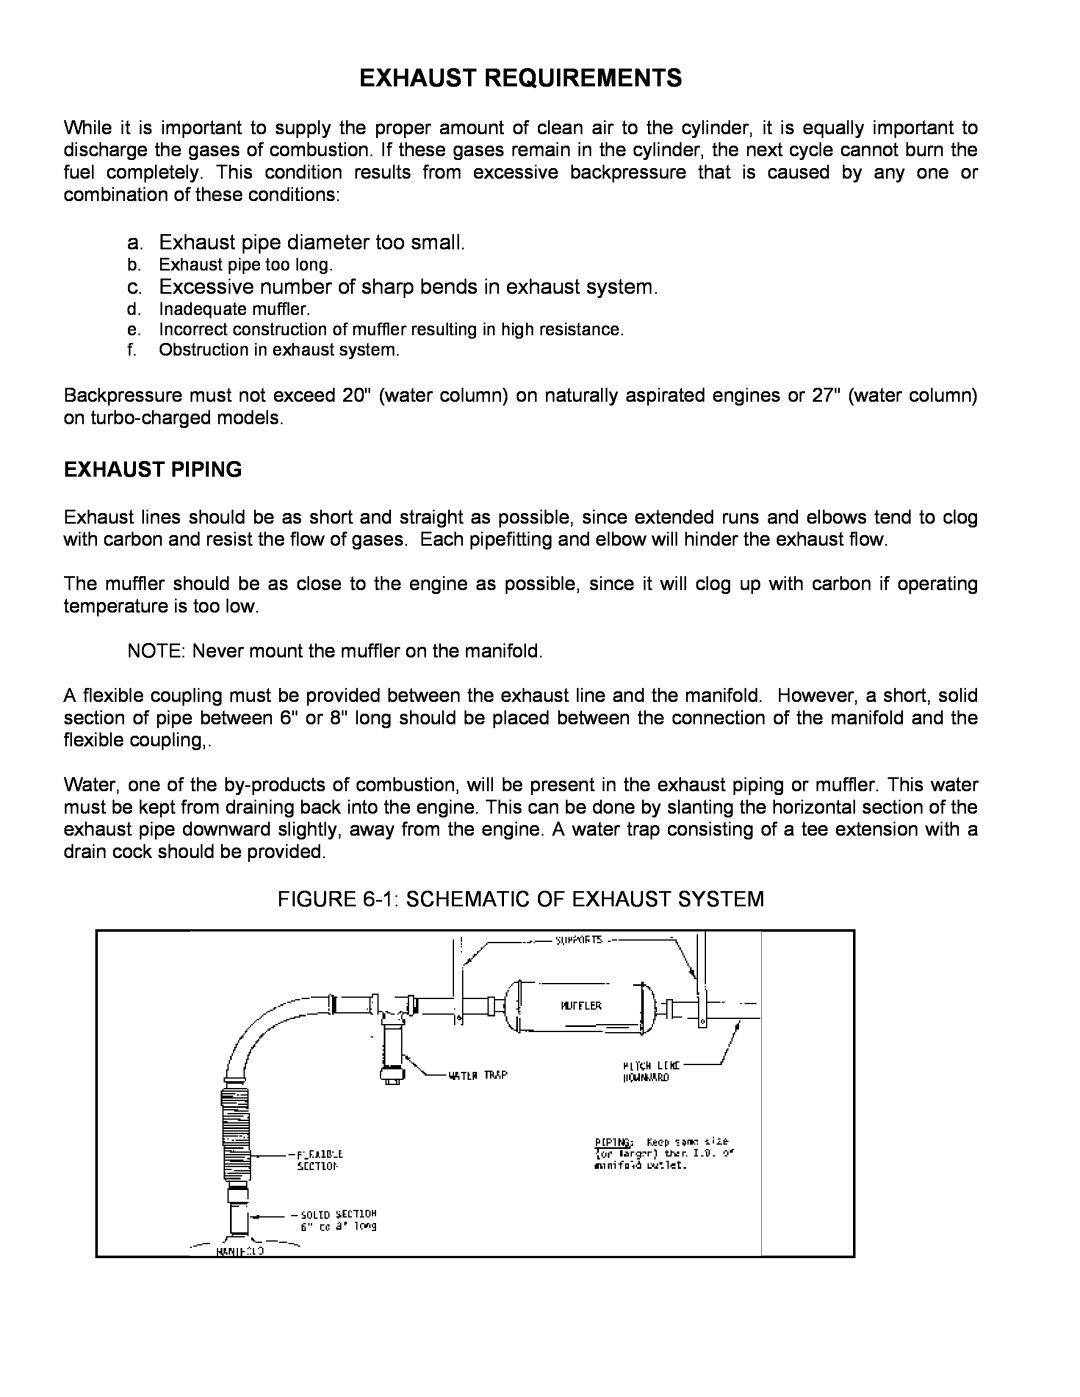 Baldor ISO9001 manual Exhaust Requirements, Exhaust Piping 